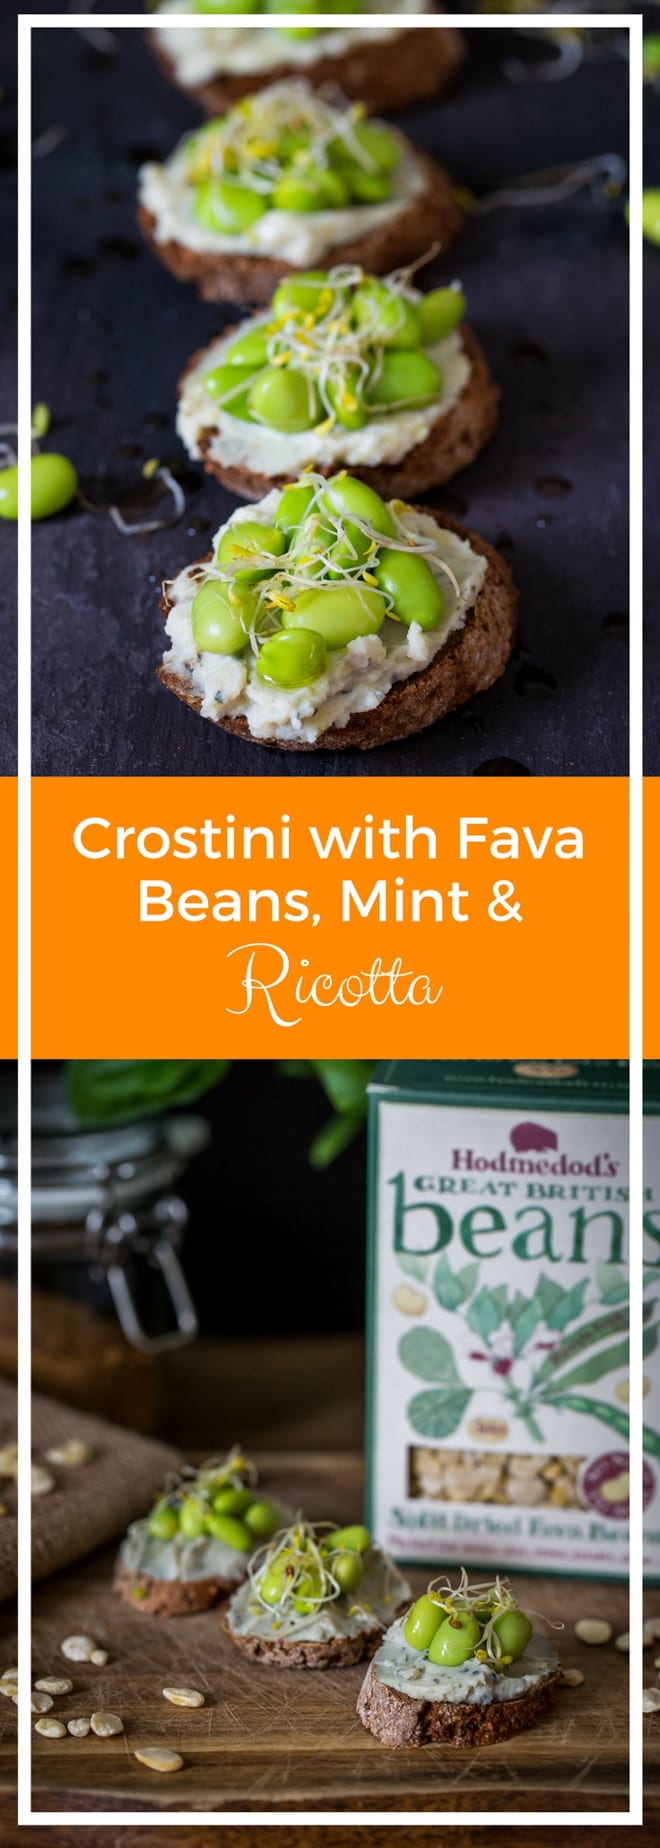 Crostini with Fava Beans, Mint and Ricotta - perfect little party nibbles or a tasty lunchtime snack! Nutrient packed fava beans combine with creamy ricotta and fresh mint | thecookandhim.com